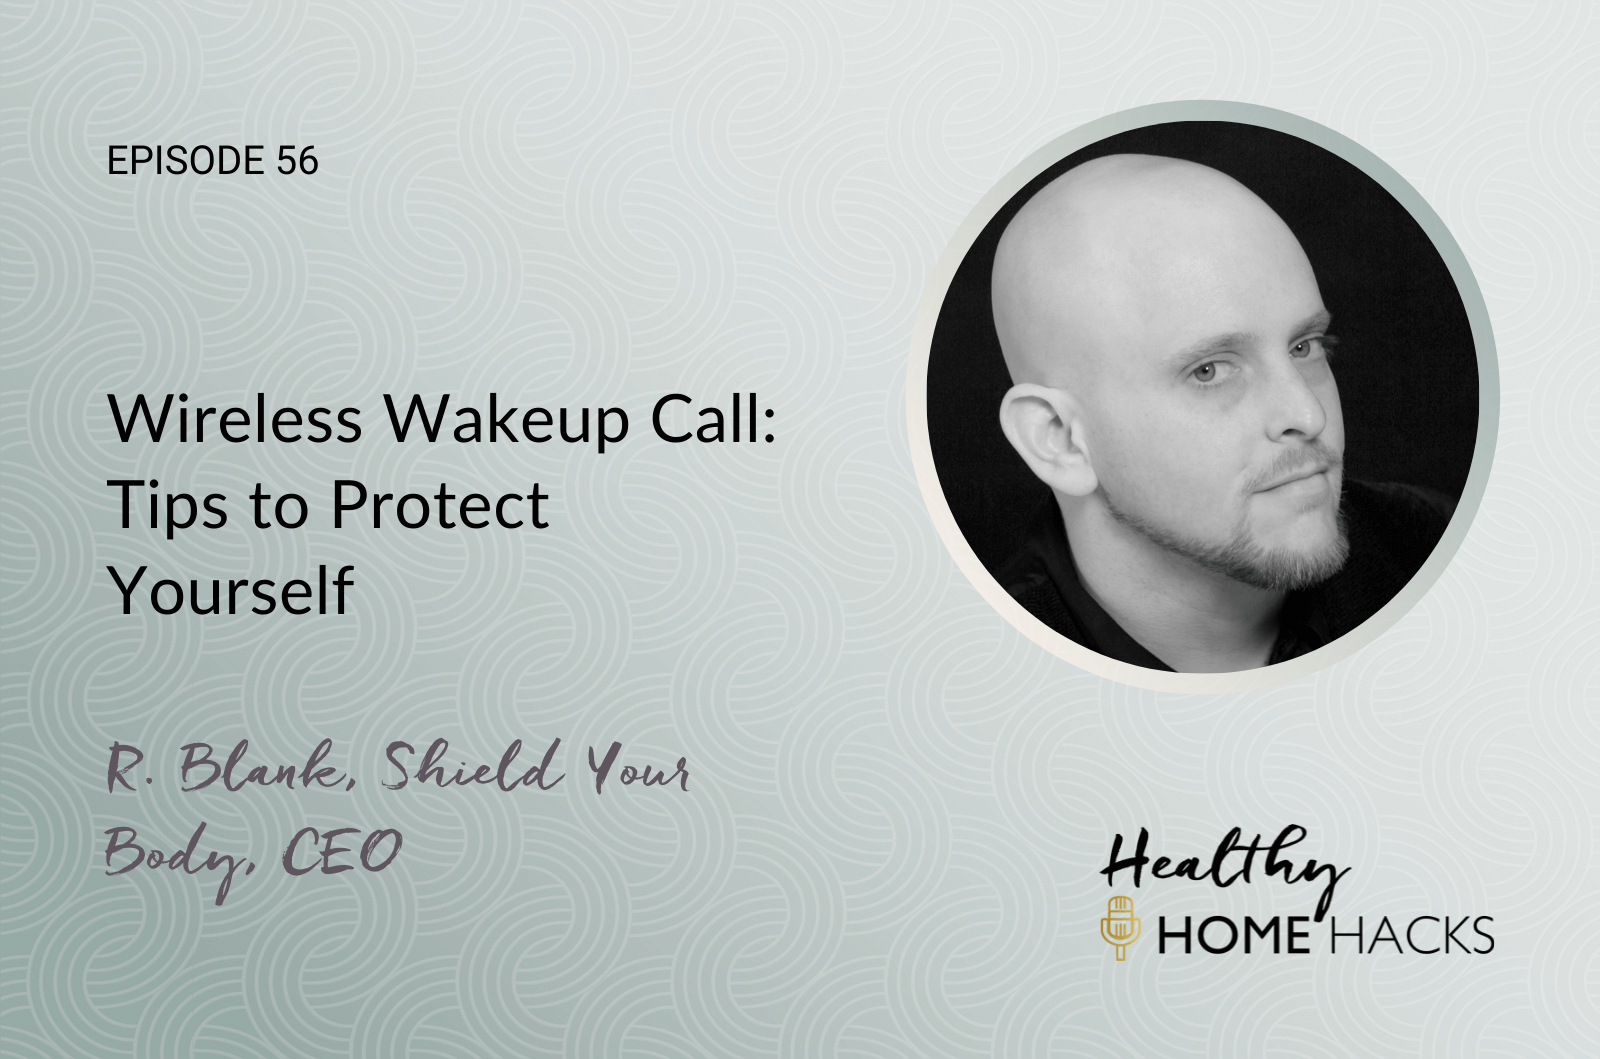 Wireless Wakeup Call: Tips to Protect Yourself